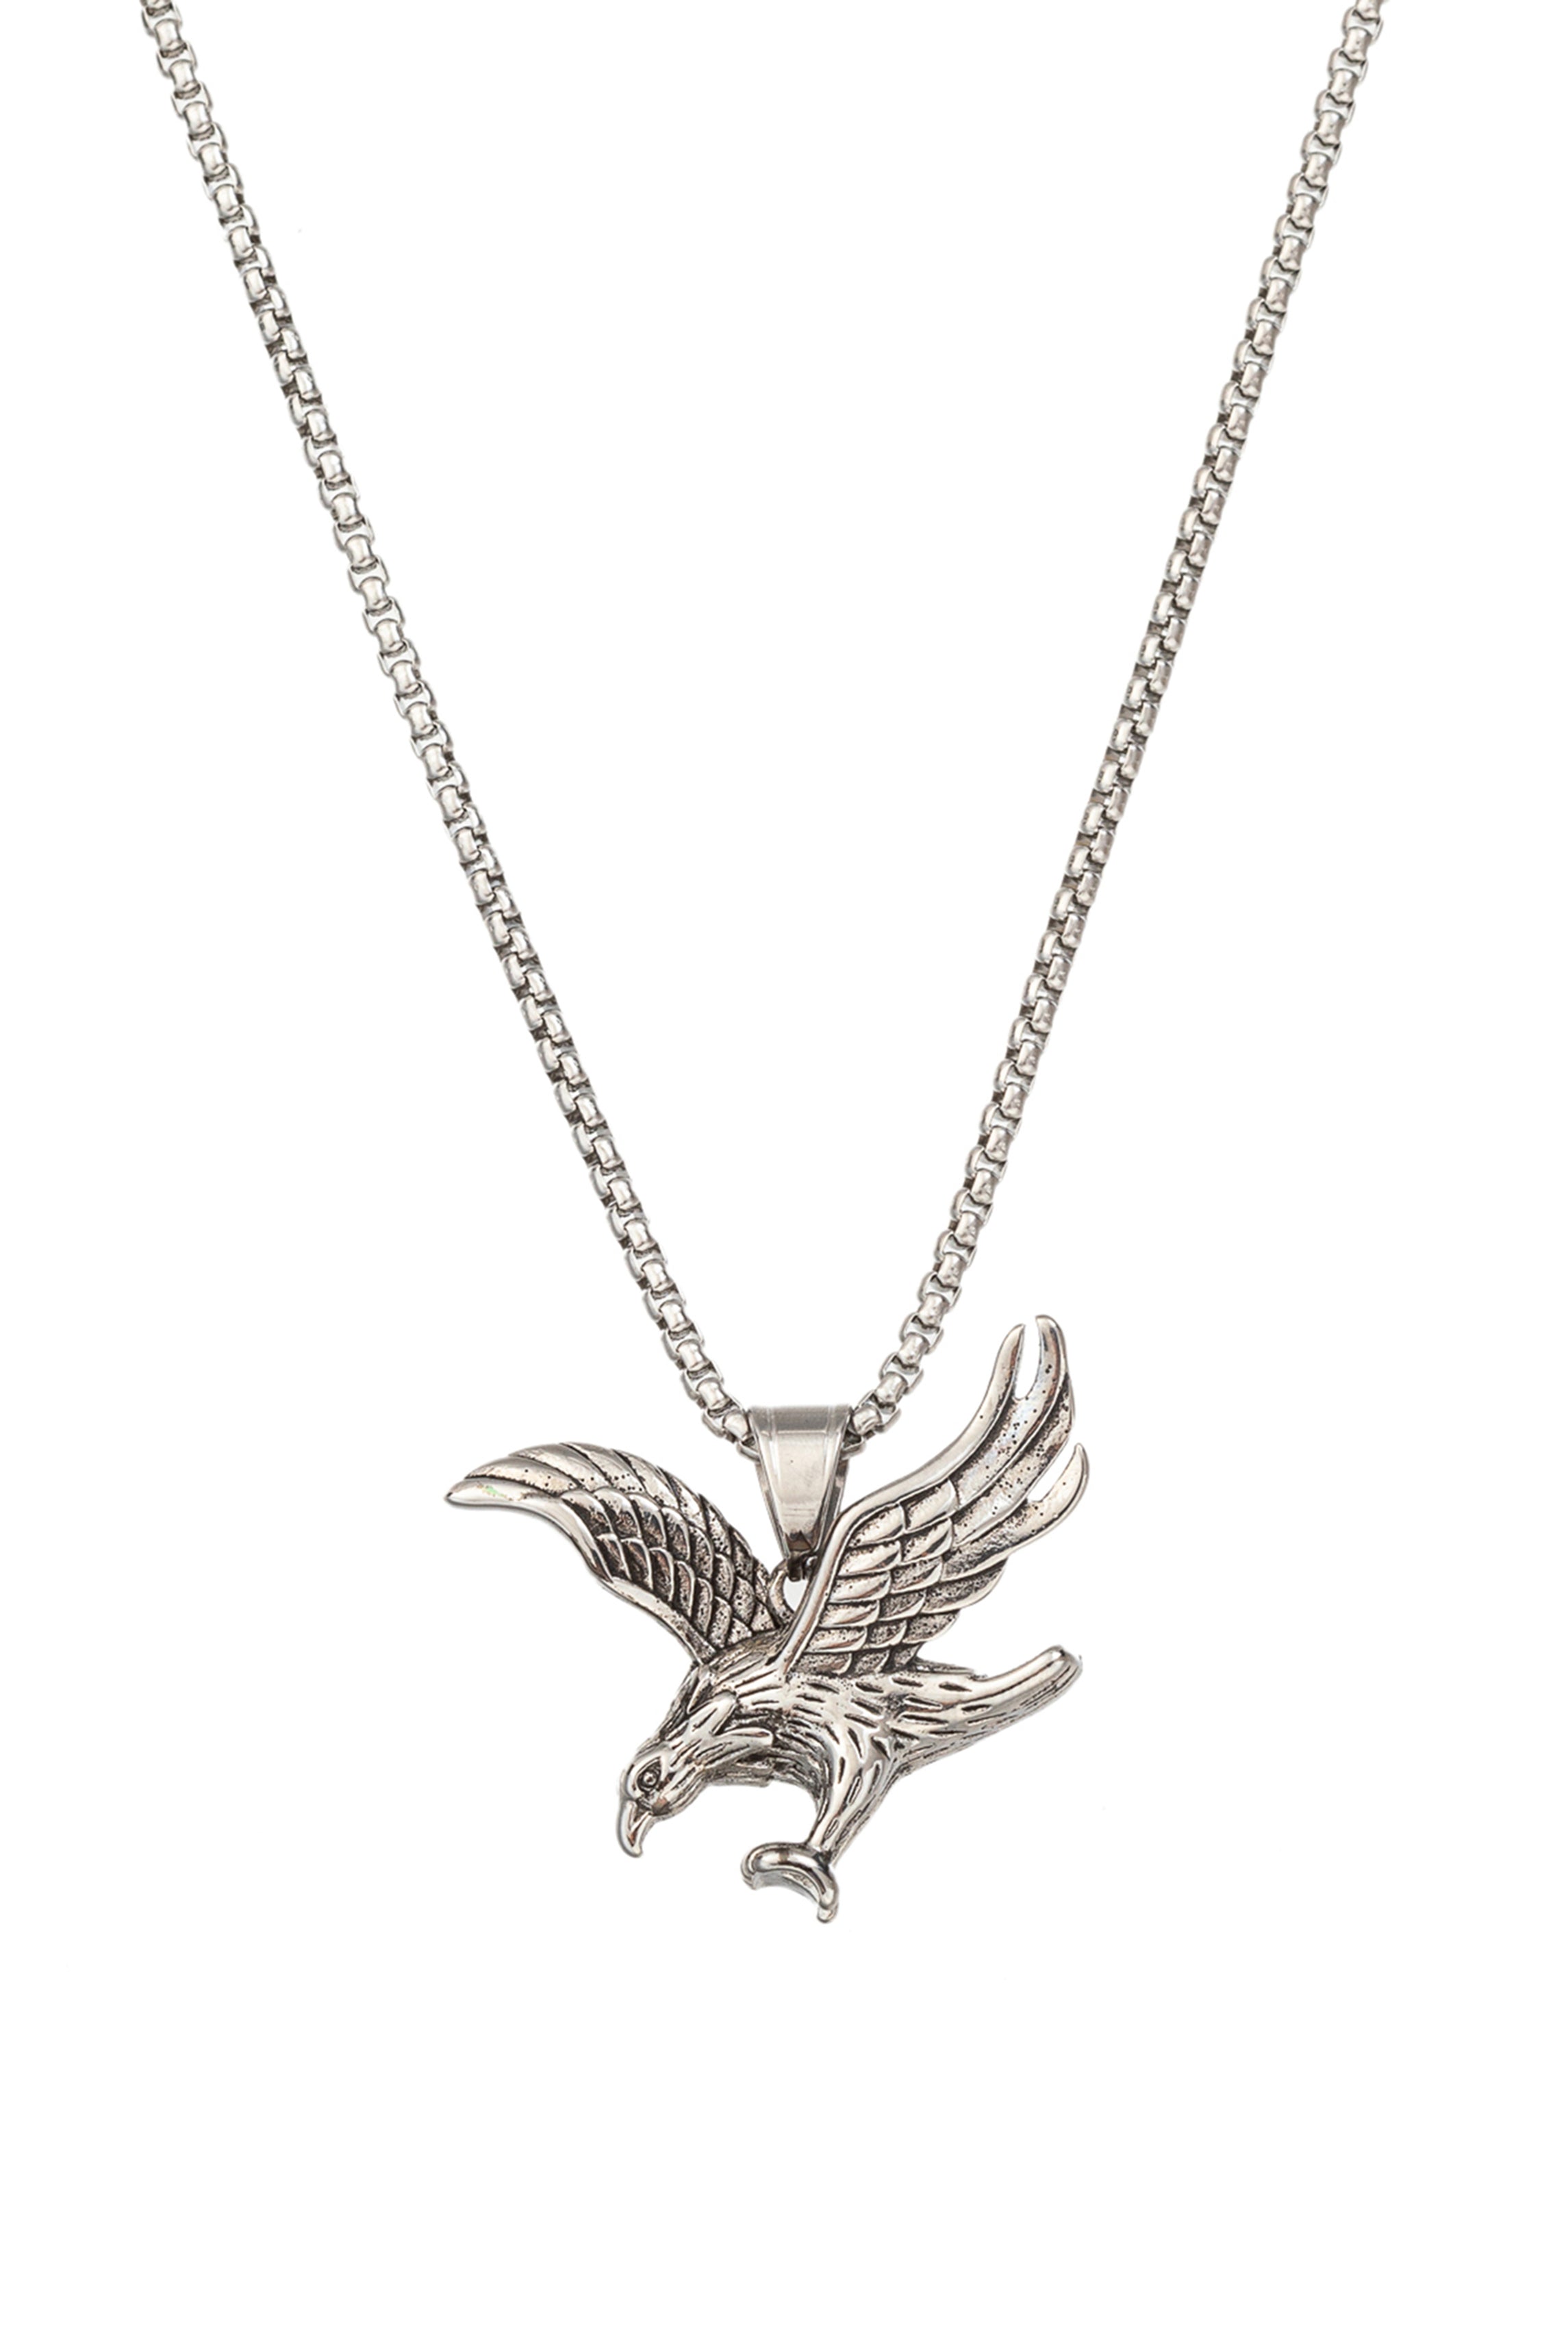 Men's Silver Titanium Flying Eagle Pendant Necklace – Eye Candy Los Angeles